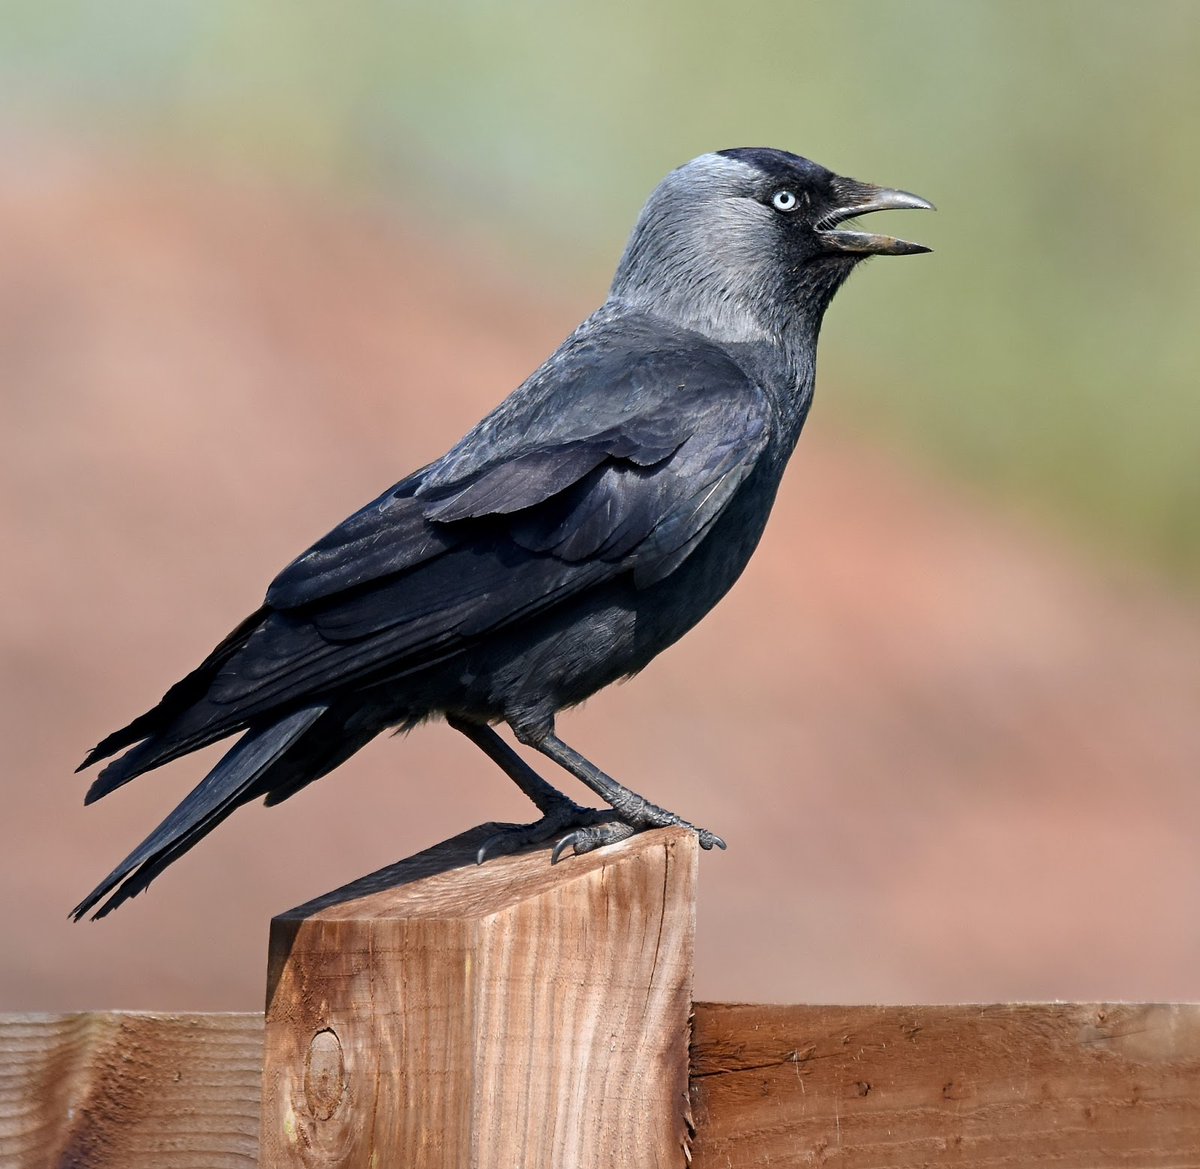 Jackdaw. Smaller than Rooks and Crows with a grey- black head. Their call sounds like 'Jack', hence their name. Sociable birds, normally seen in small groups. Nest in and on old buildings and in tree cavities. #SelfIsolationBirdWatch 